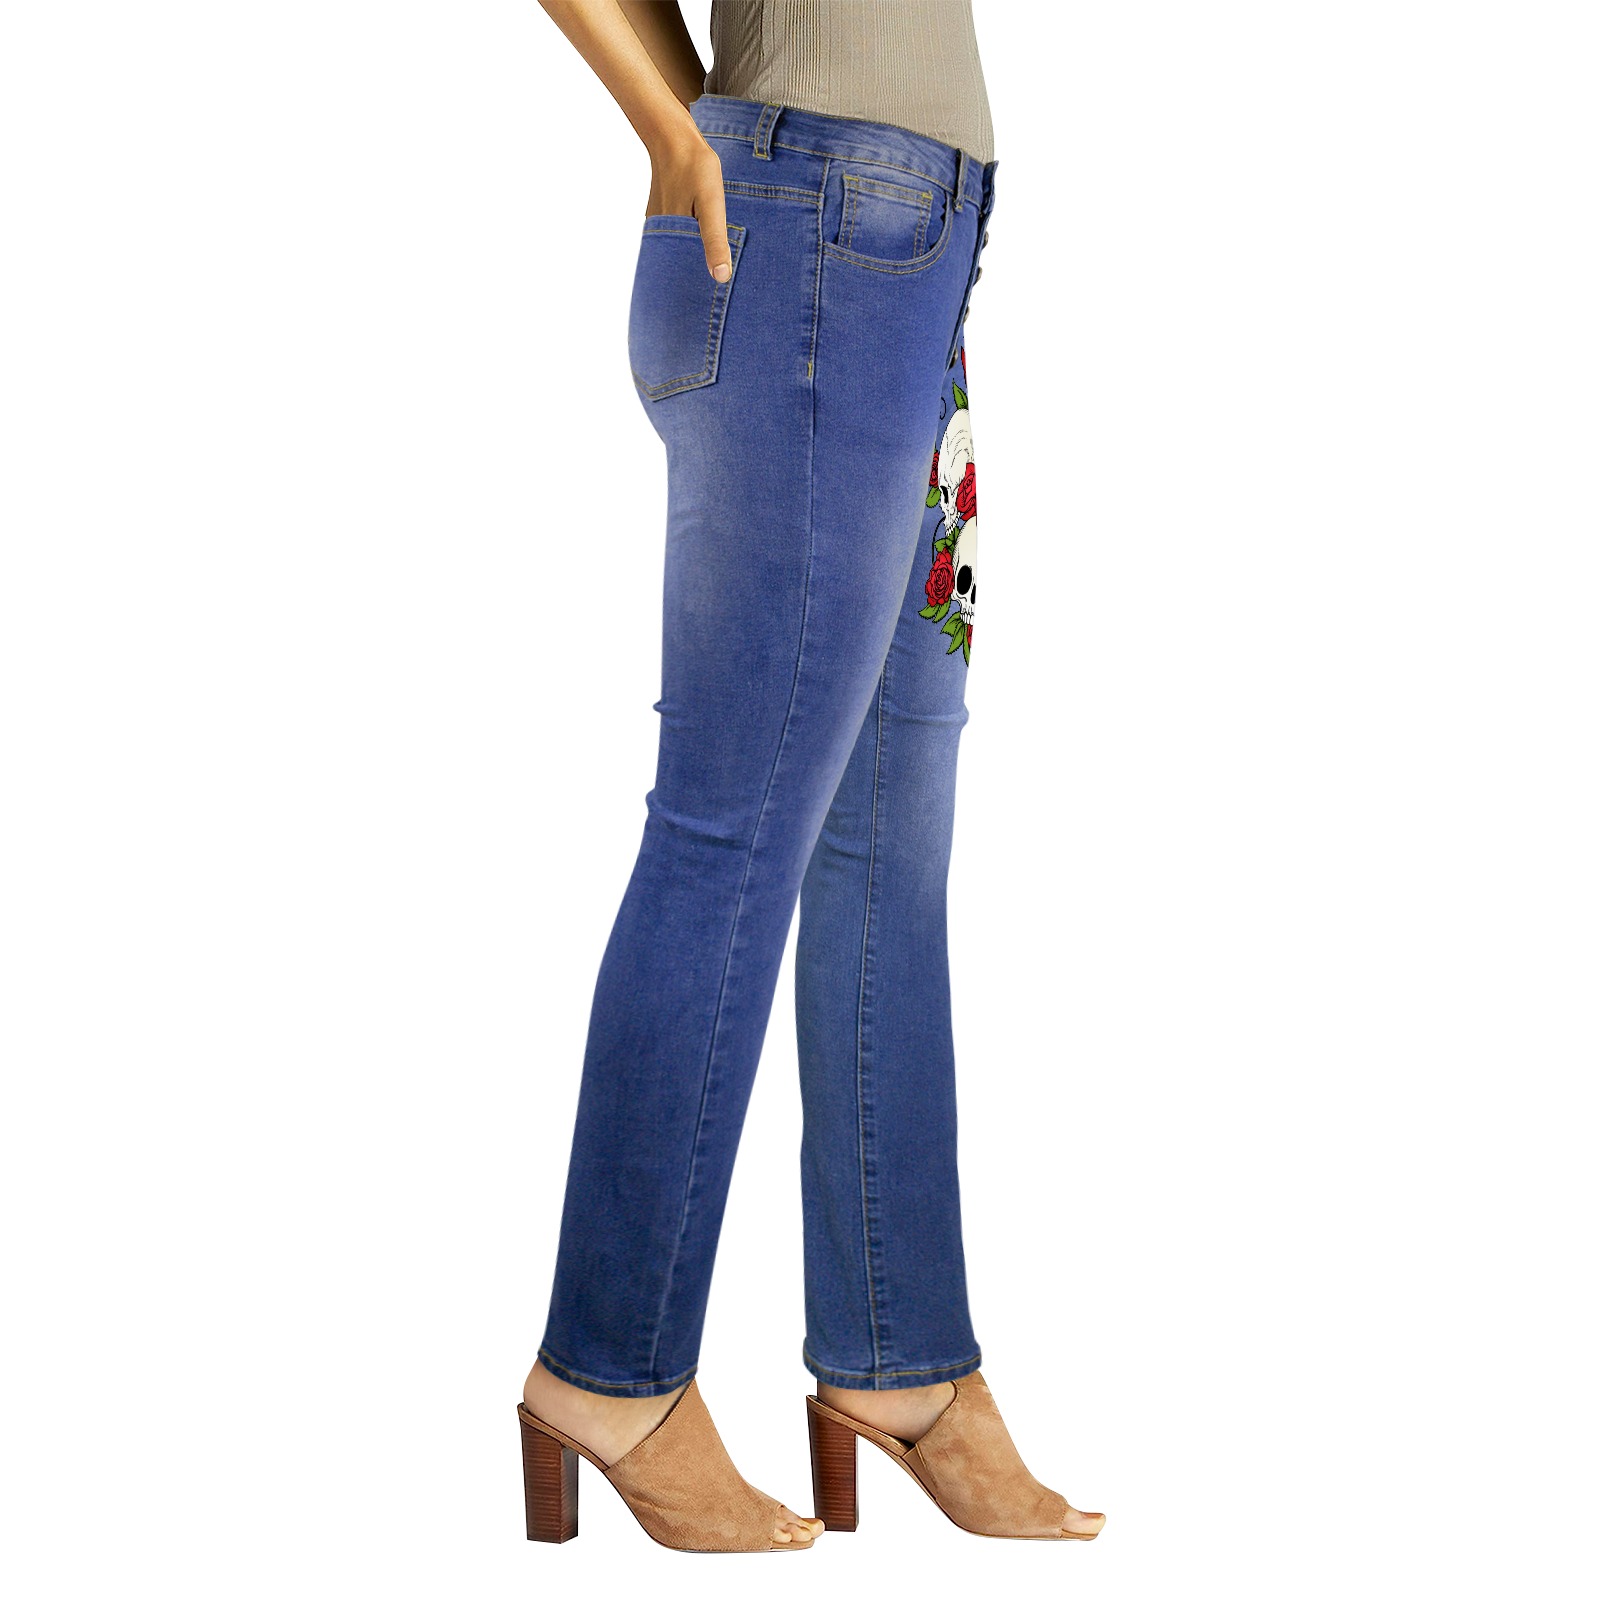 Skully Rose Colorado Royal Women's Jeans (Front&Back Printing)